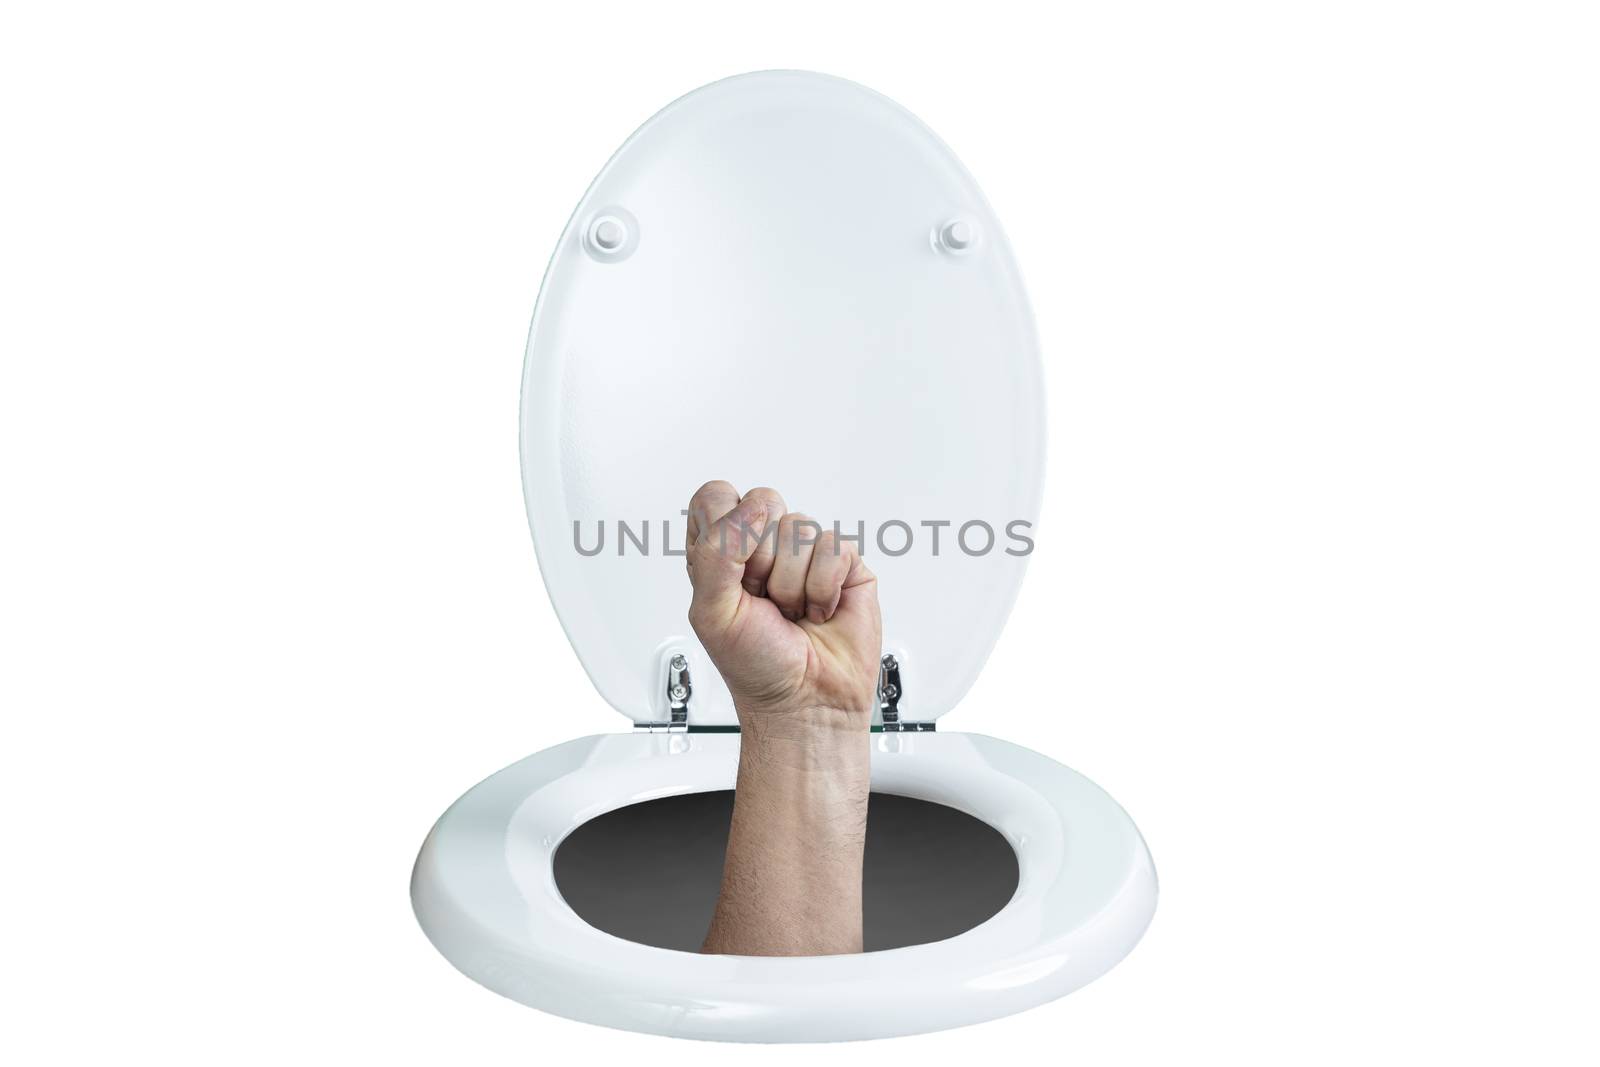 a hand with a clenched fist coming out of the toilet